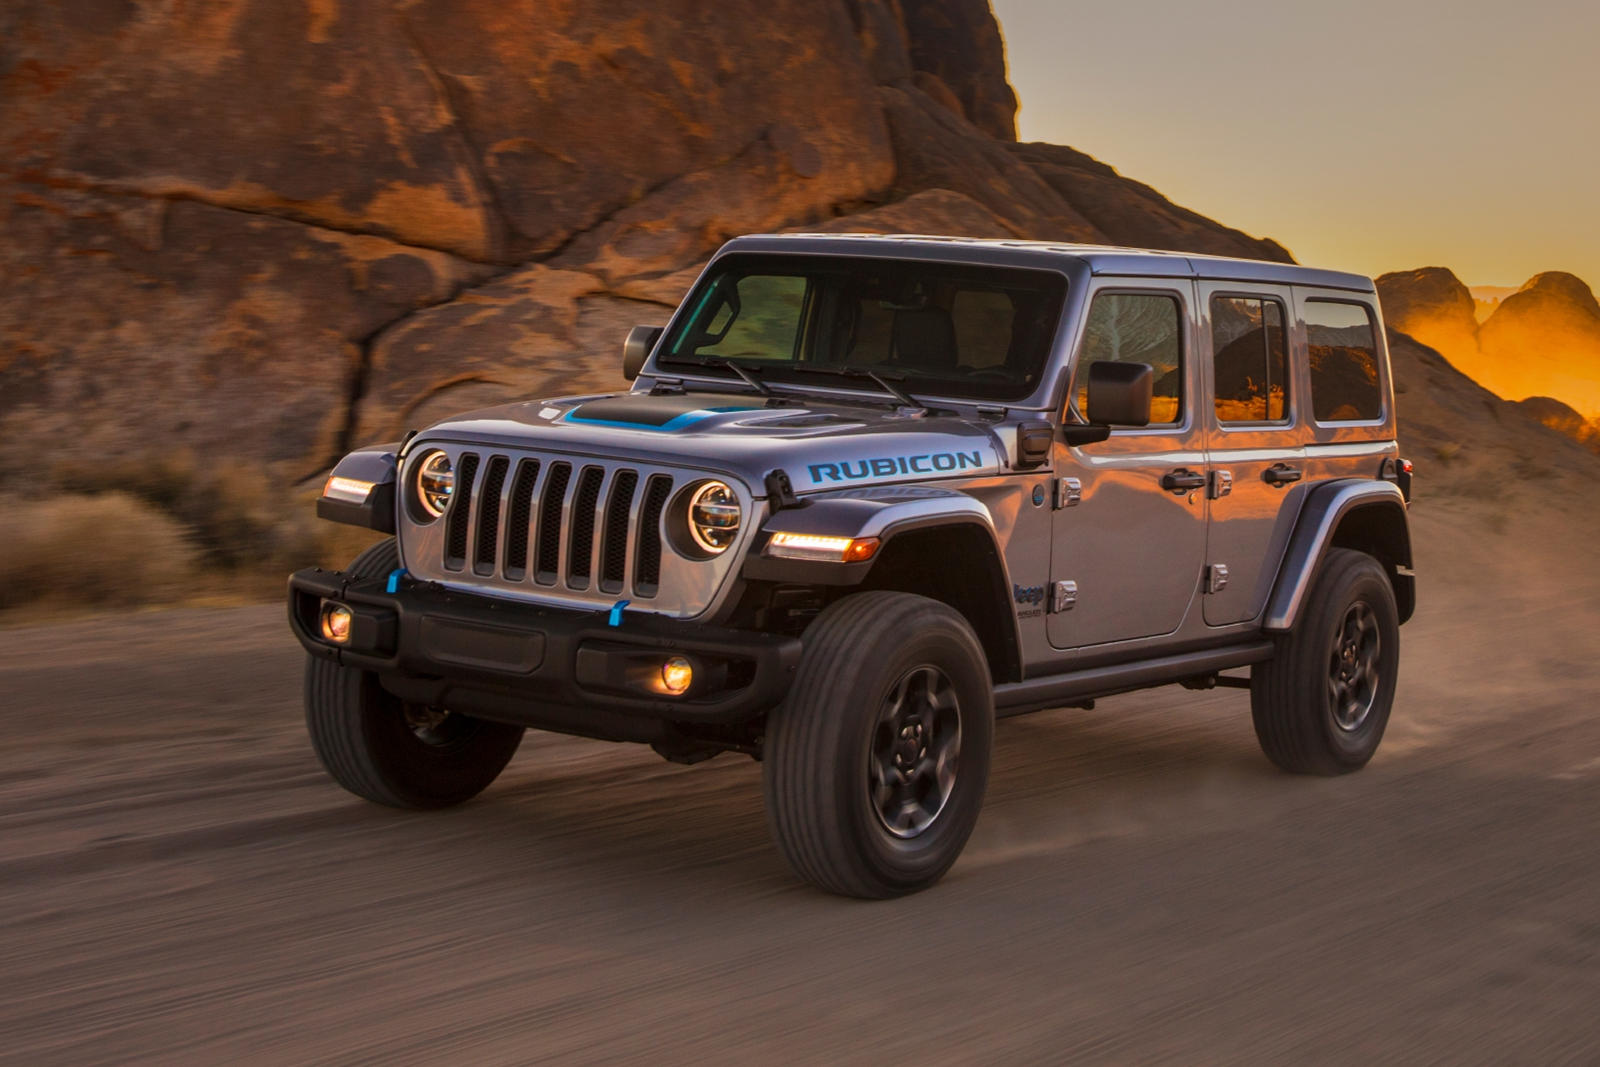 2021 Jeep Wrangler 4xe Hybrid Is A Better Deal Than You Think | CarBuzz